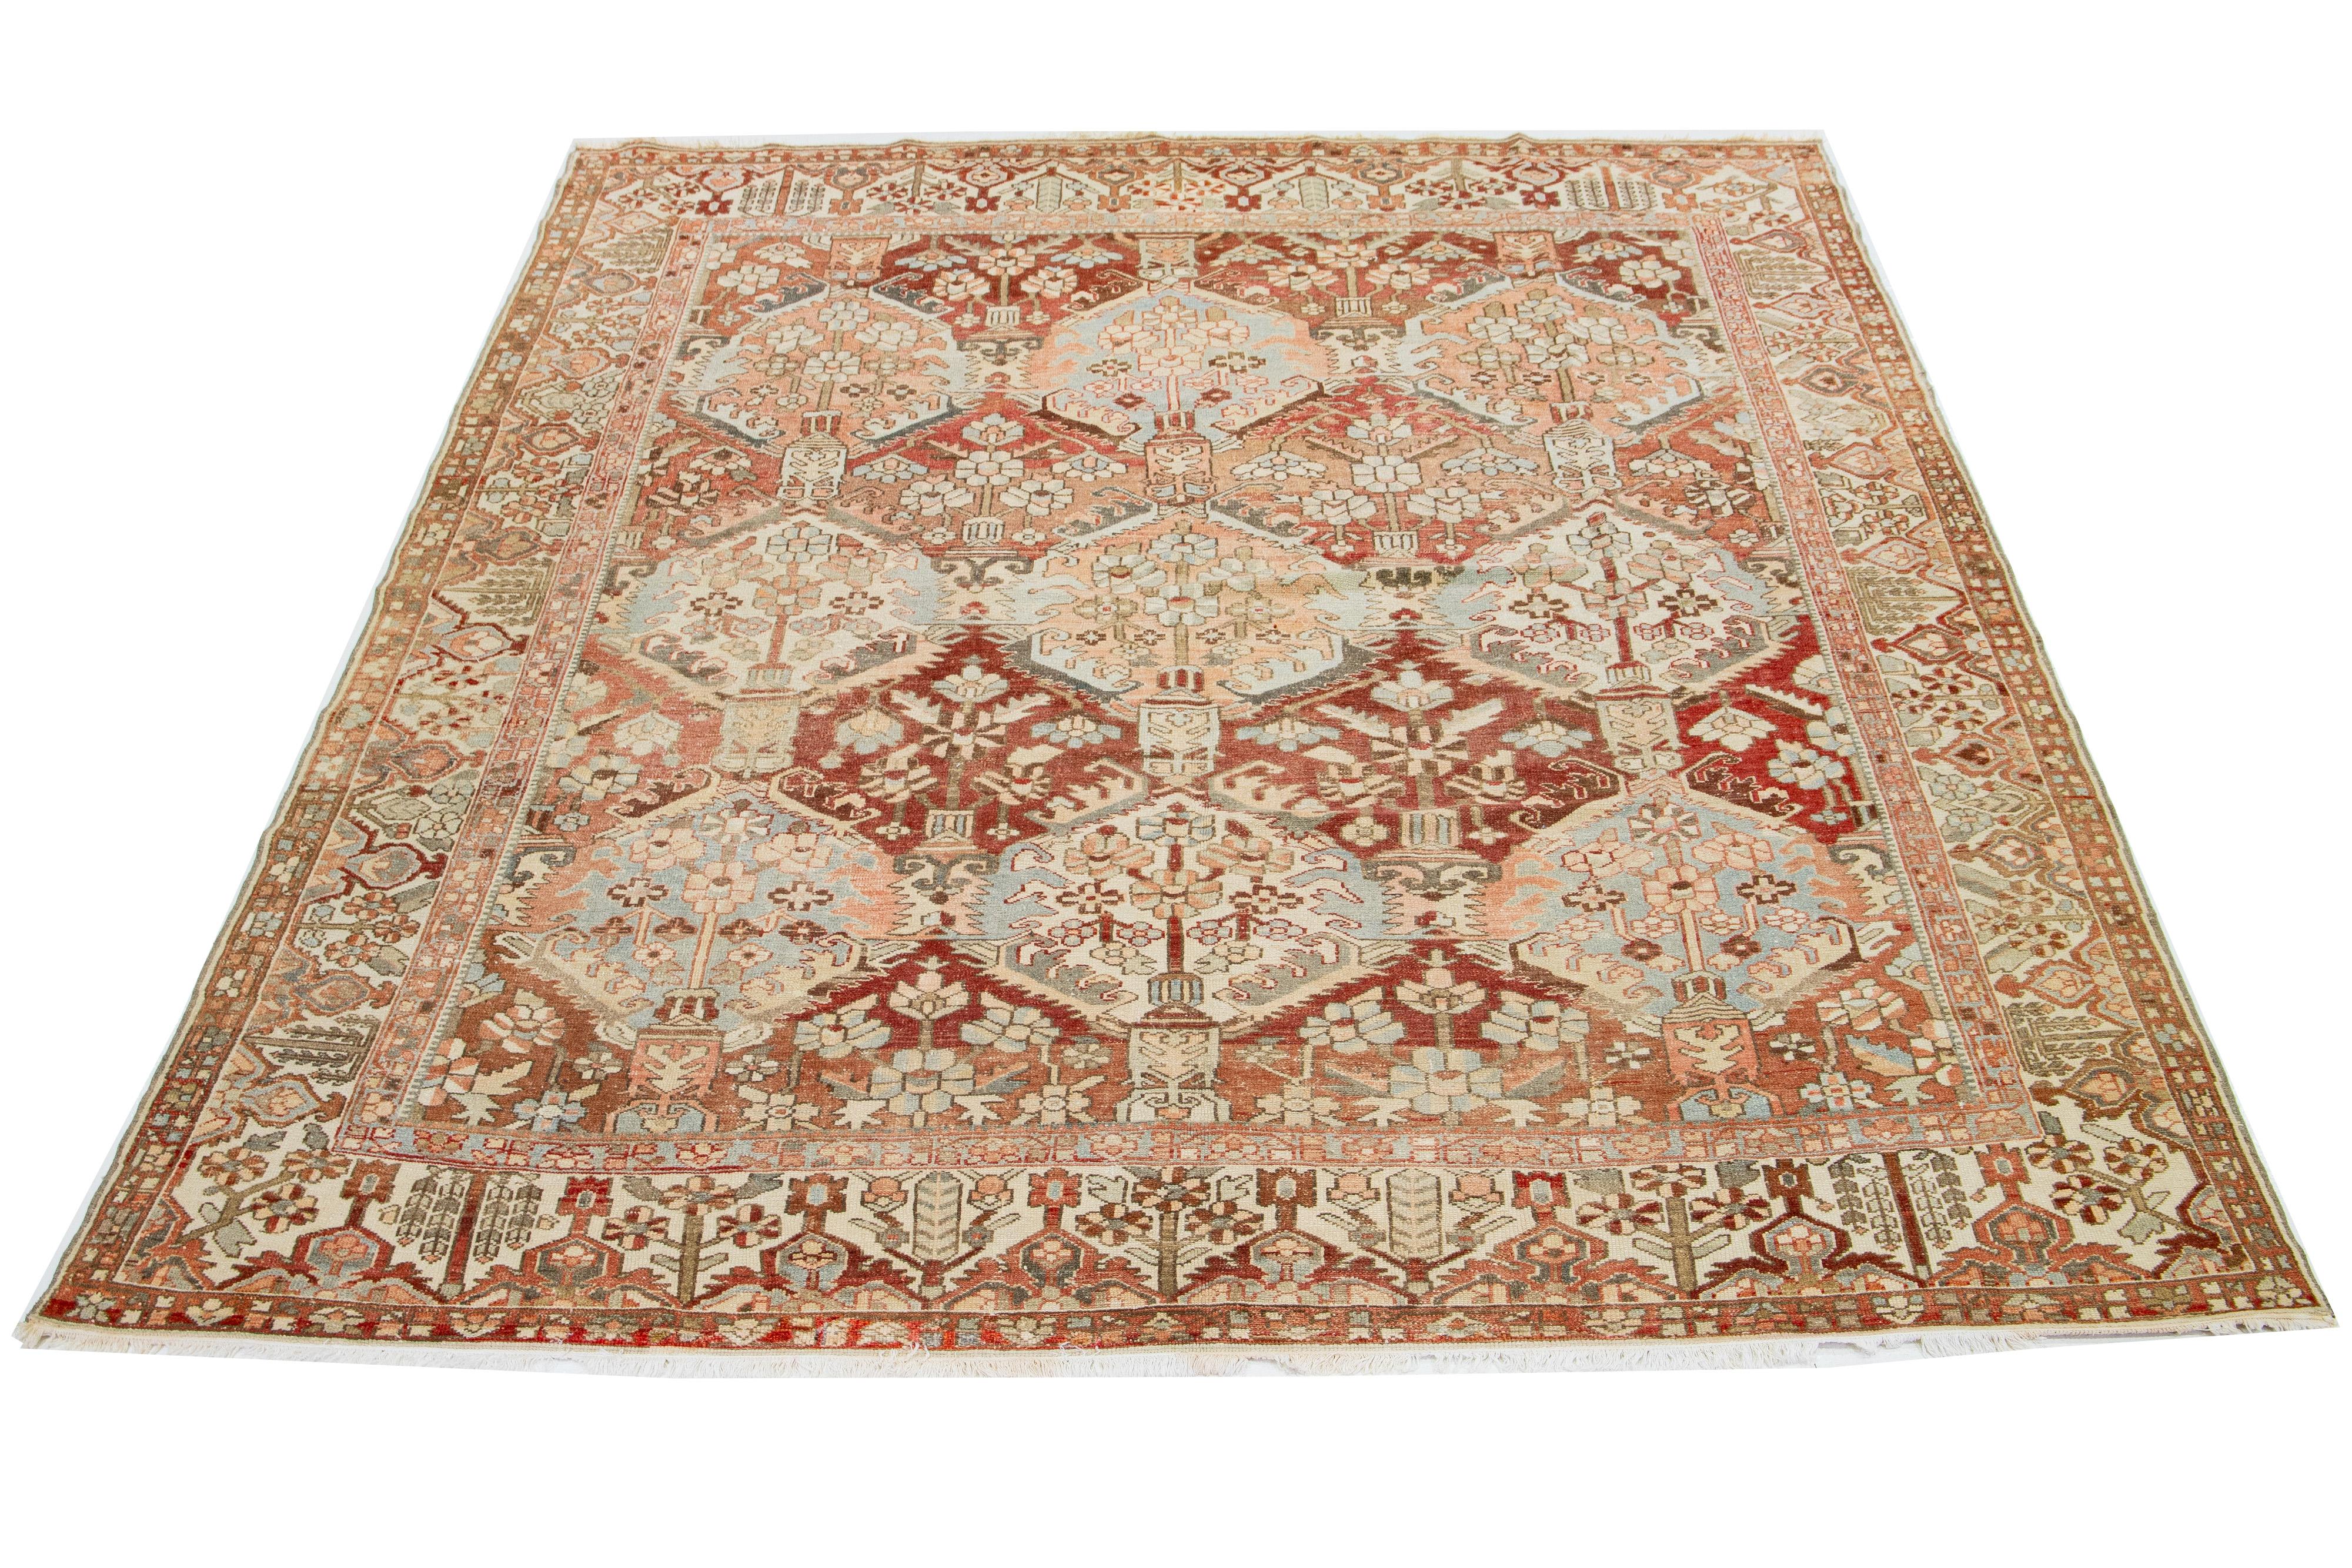 This is a beautiful Antique Bakhtiari hand-knotted wool rug featuring a red-rust color field. It showcases a classic Persian design with blue, beige, and peach floral colors.

This rug measures 10'5